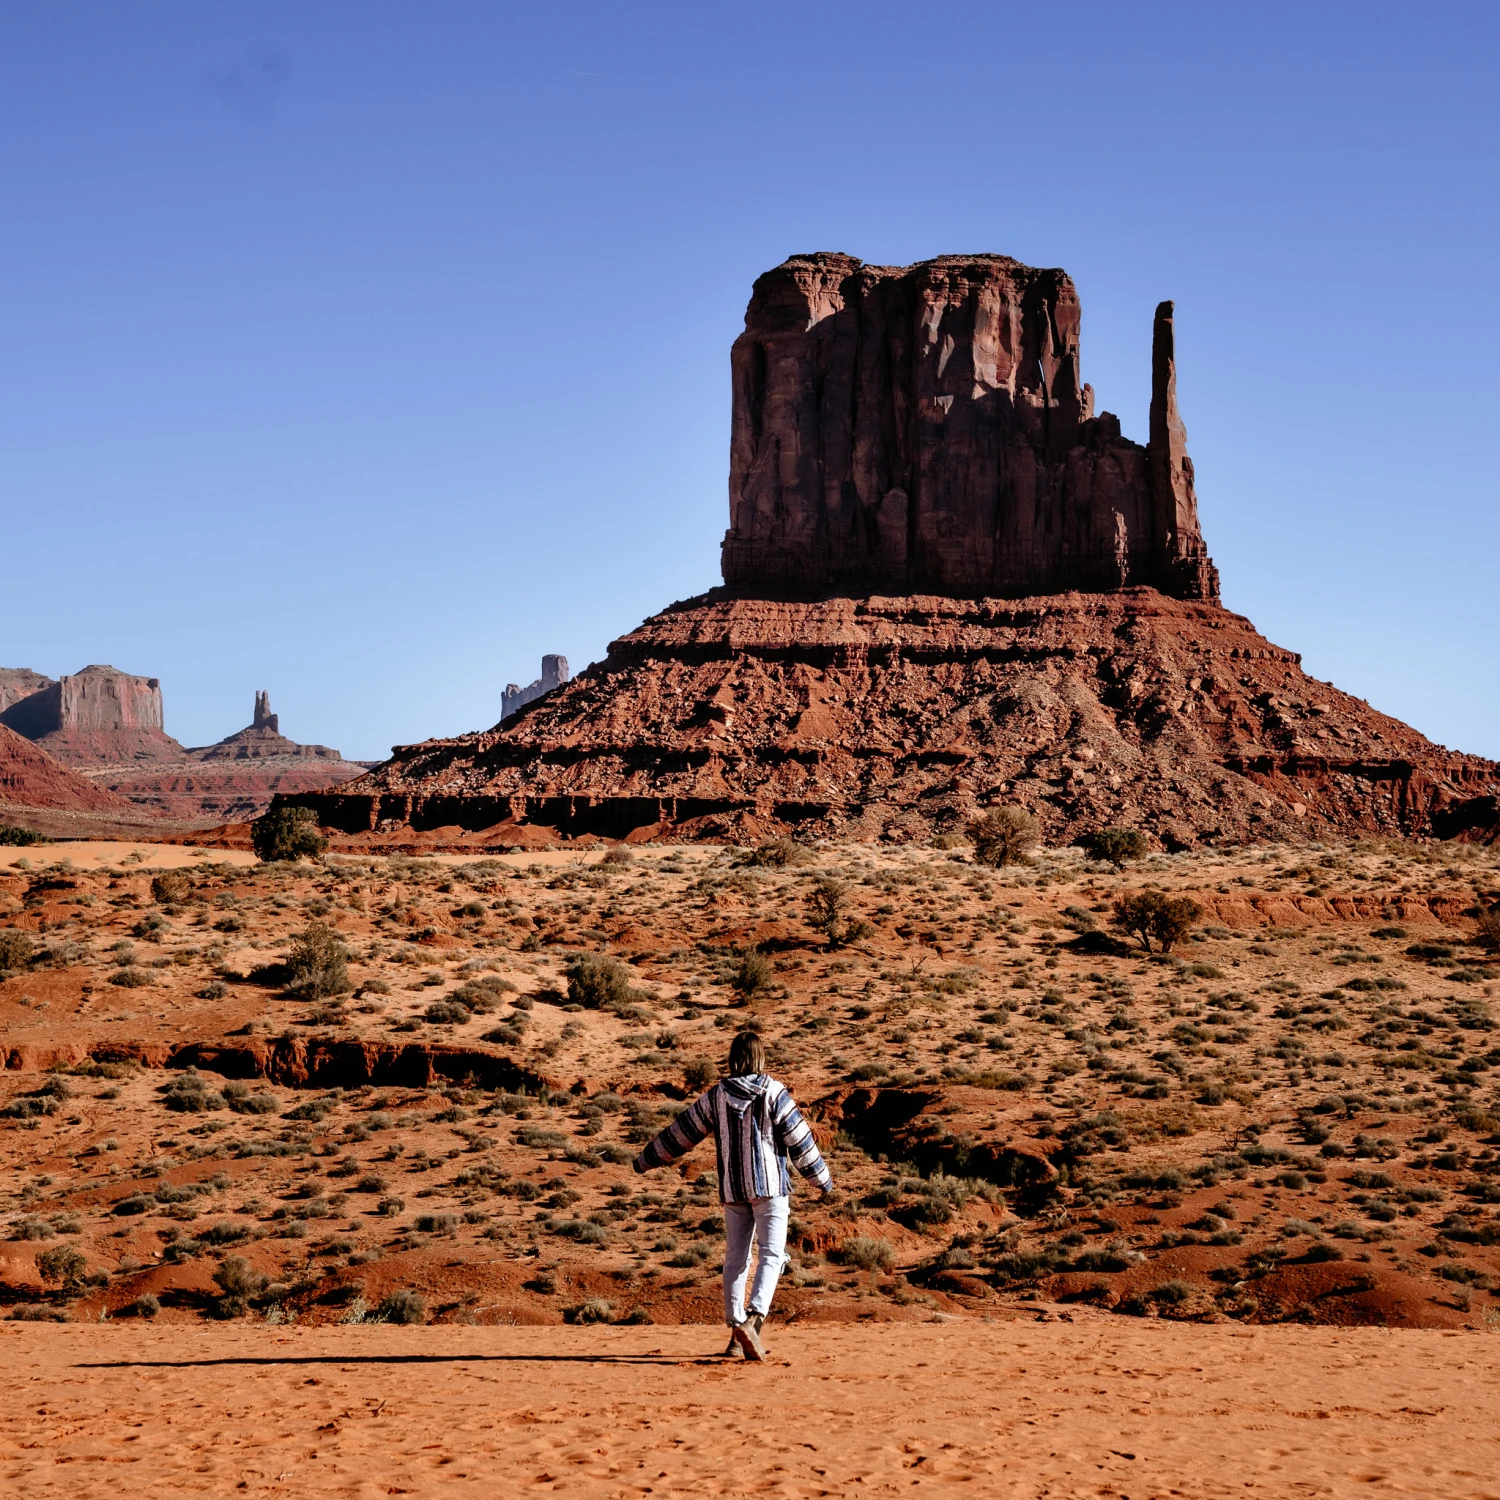 Picture of a woman standing in a dried region